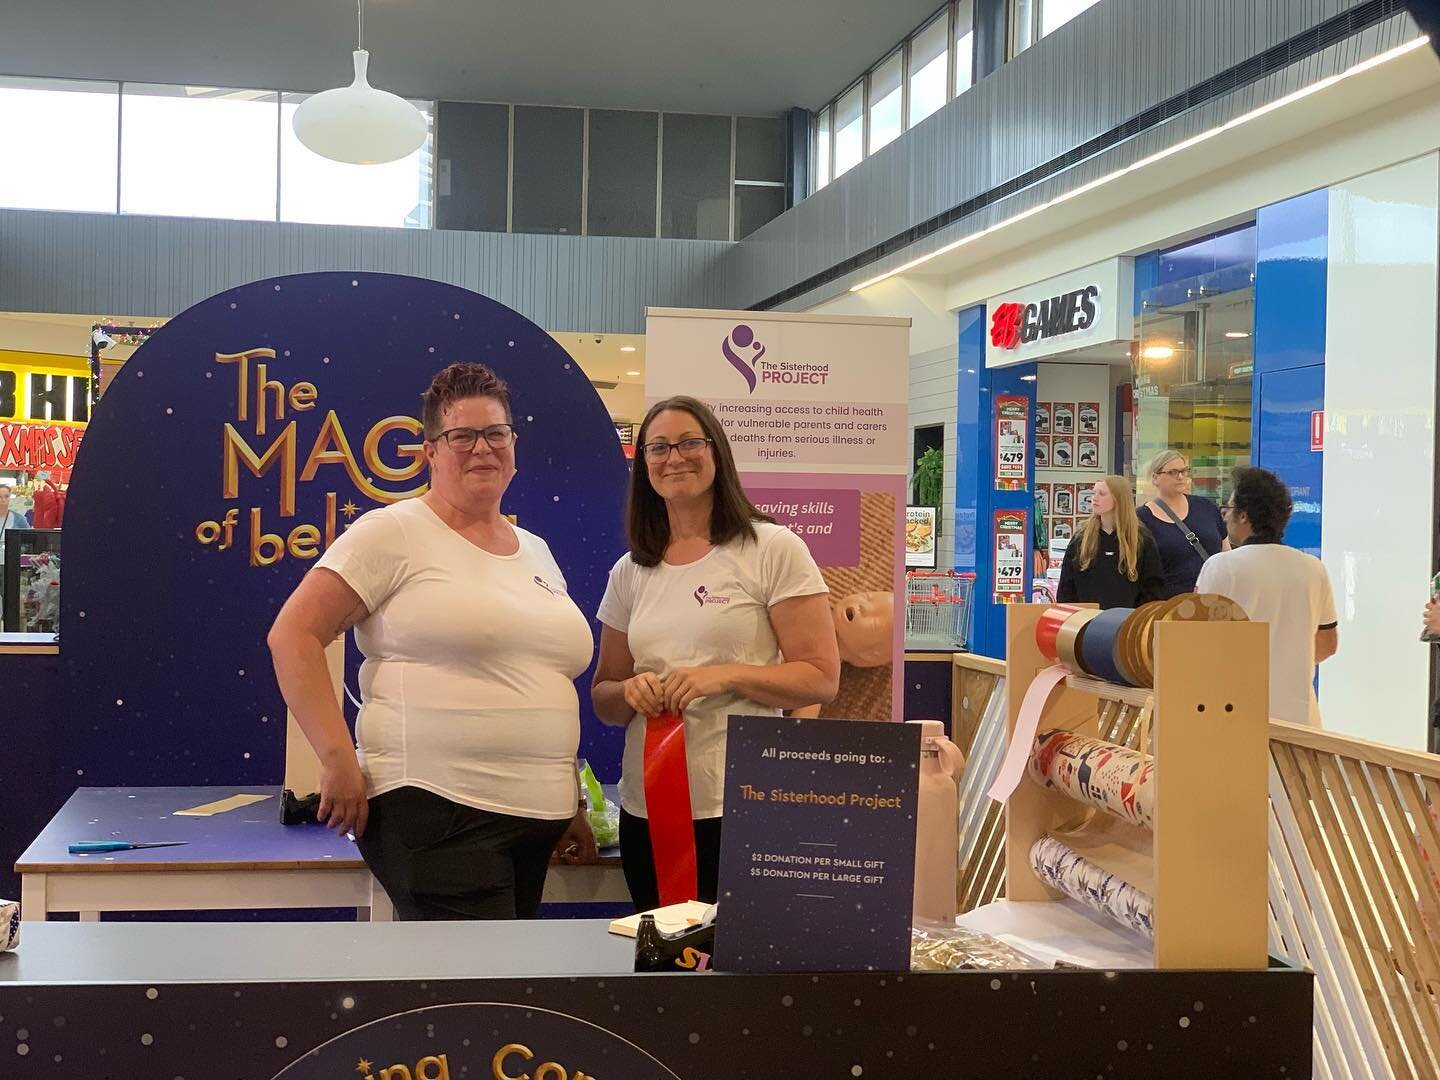 Come on down to @westfieldairportwest today to get your Xmas presents wrapped and help out the @the.sisterhoodproject at the same time 🥰

Our very friendly happy wrappers Kate, Grace and Skye are here to make your pressies stand out this Christmas!
